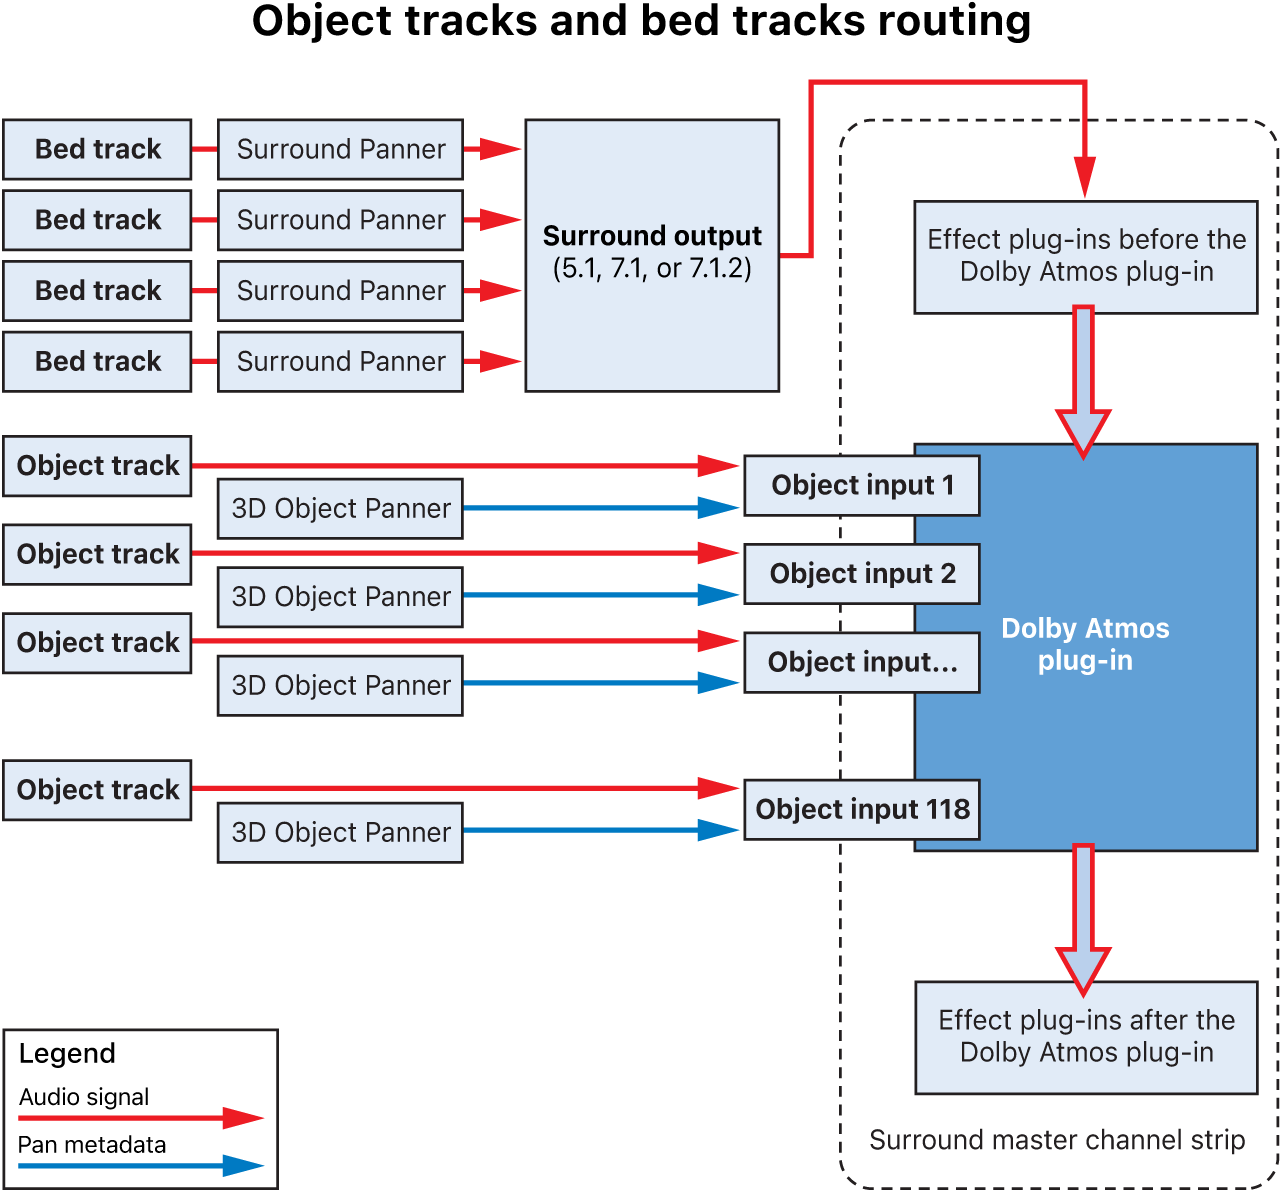 Figure. Bed tracks and object tracks routing.